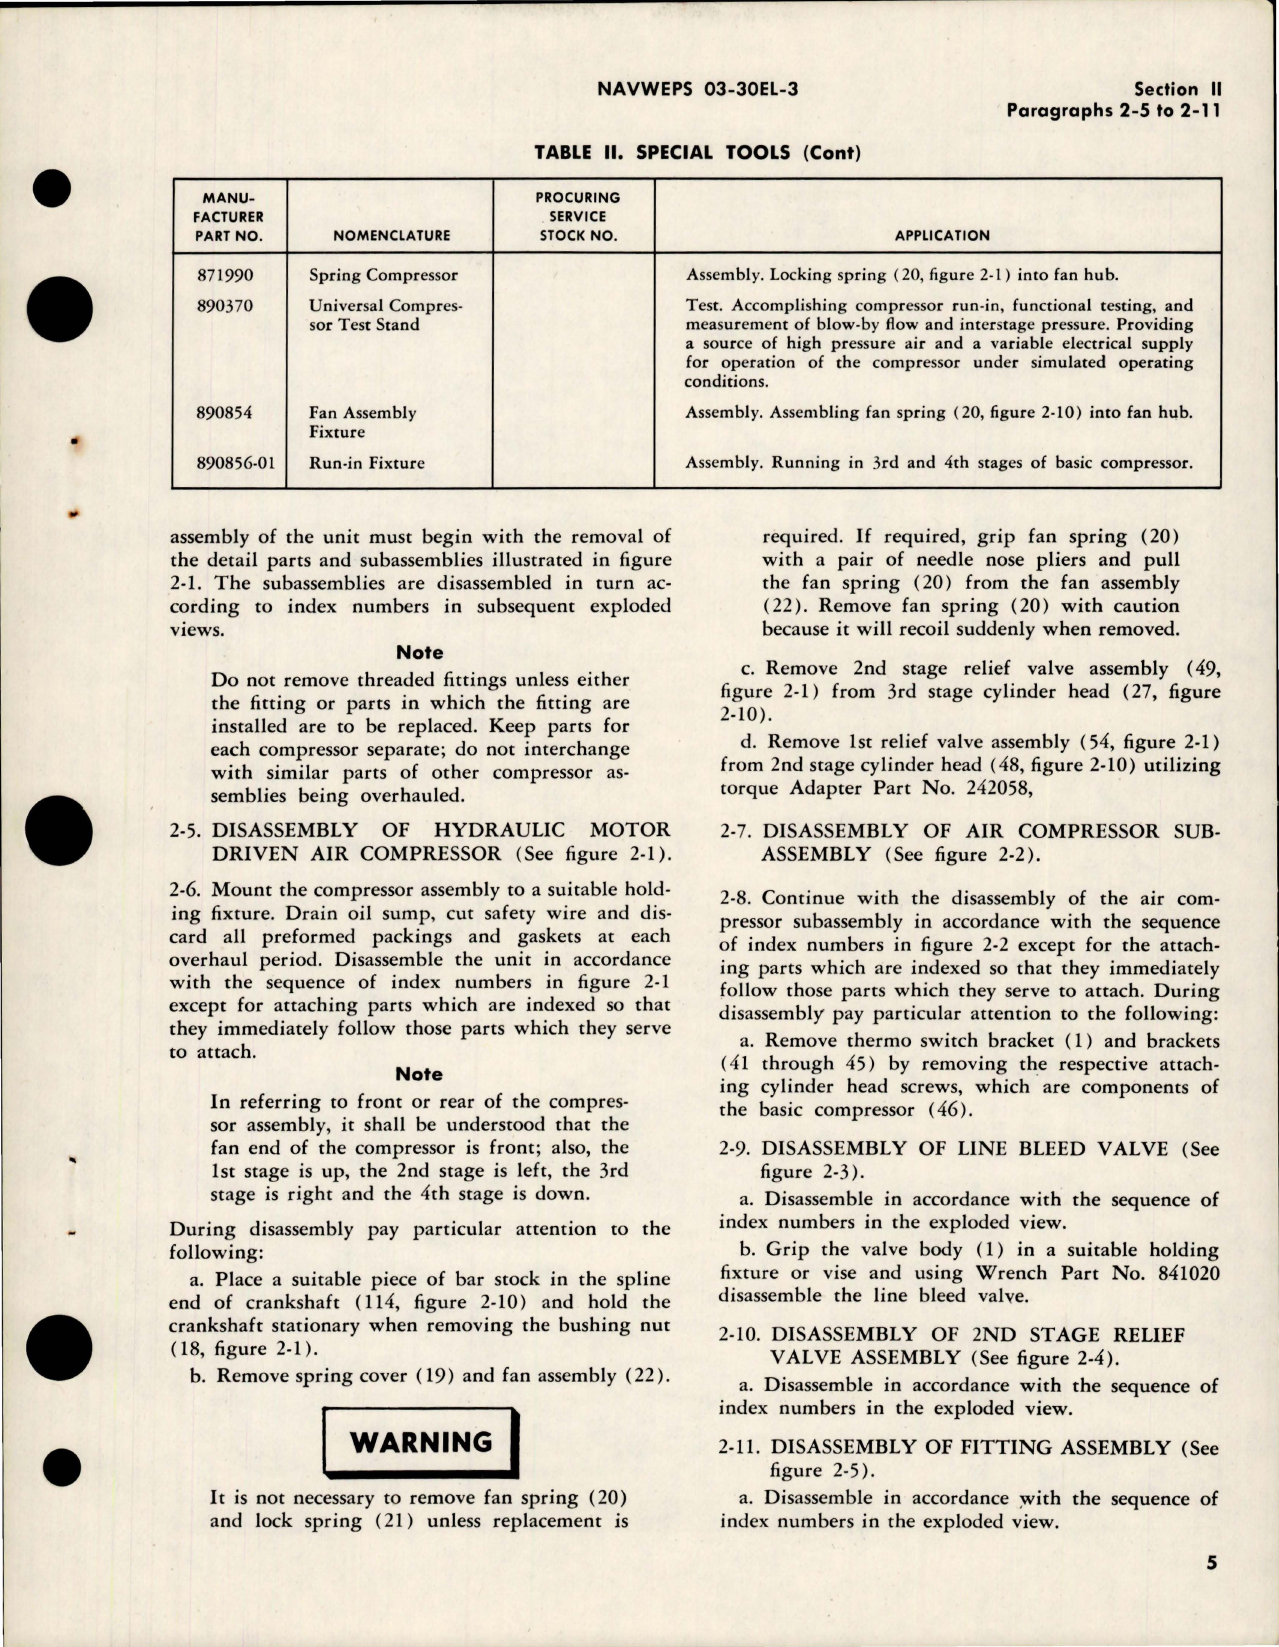 Sample page 9 from AirCorps Library document: Overhaul Instructions for Hydraulic Motor Driven Air Compressor - 891406 